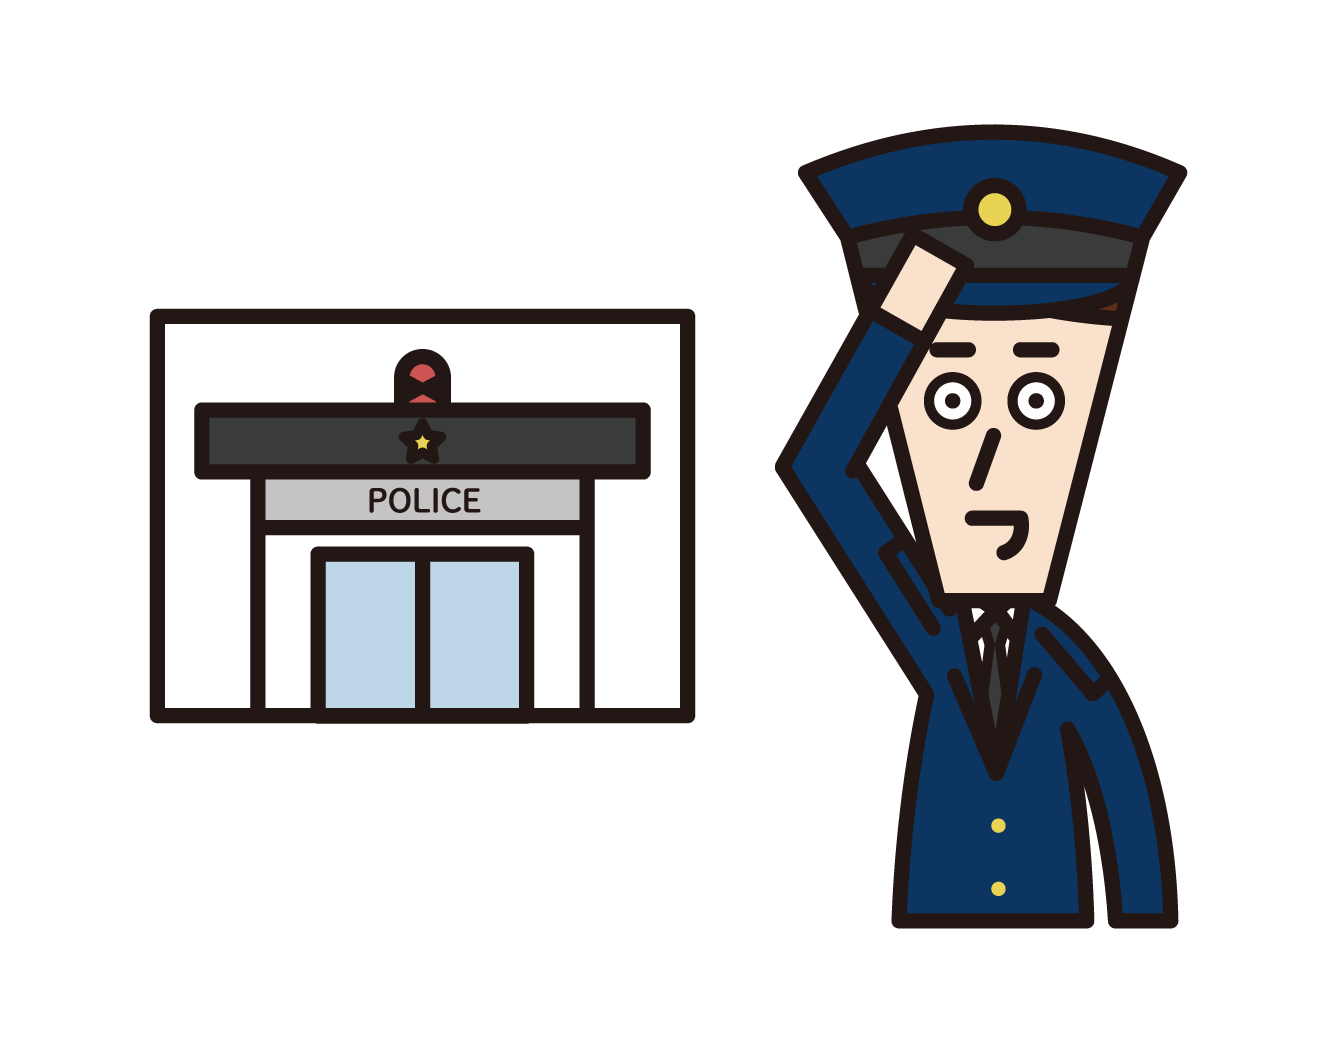 Illustration of a security guard (male) organizing traffic